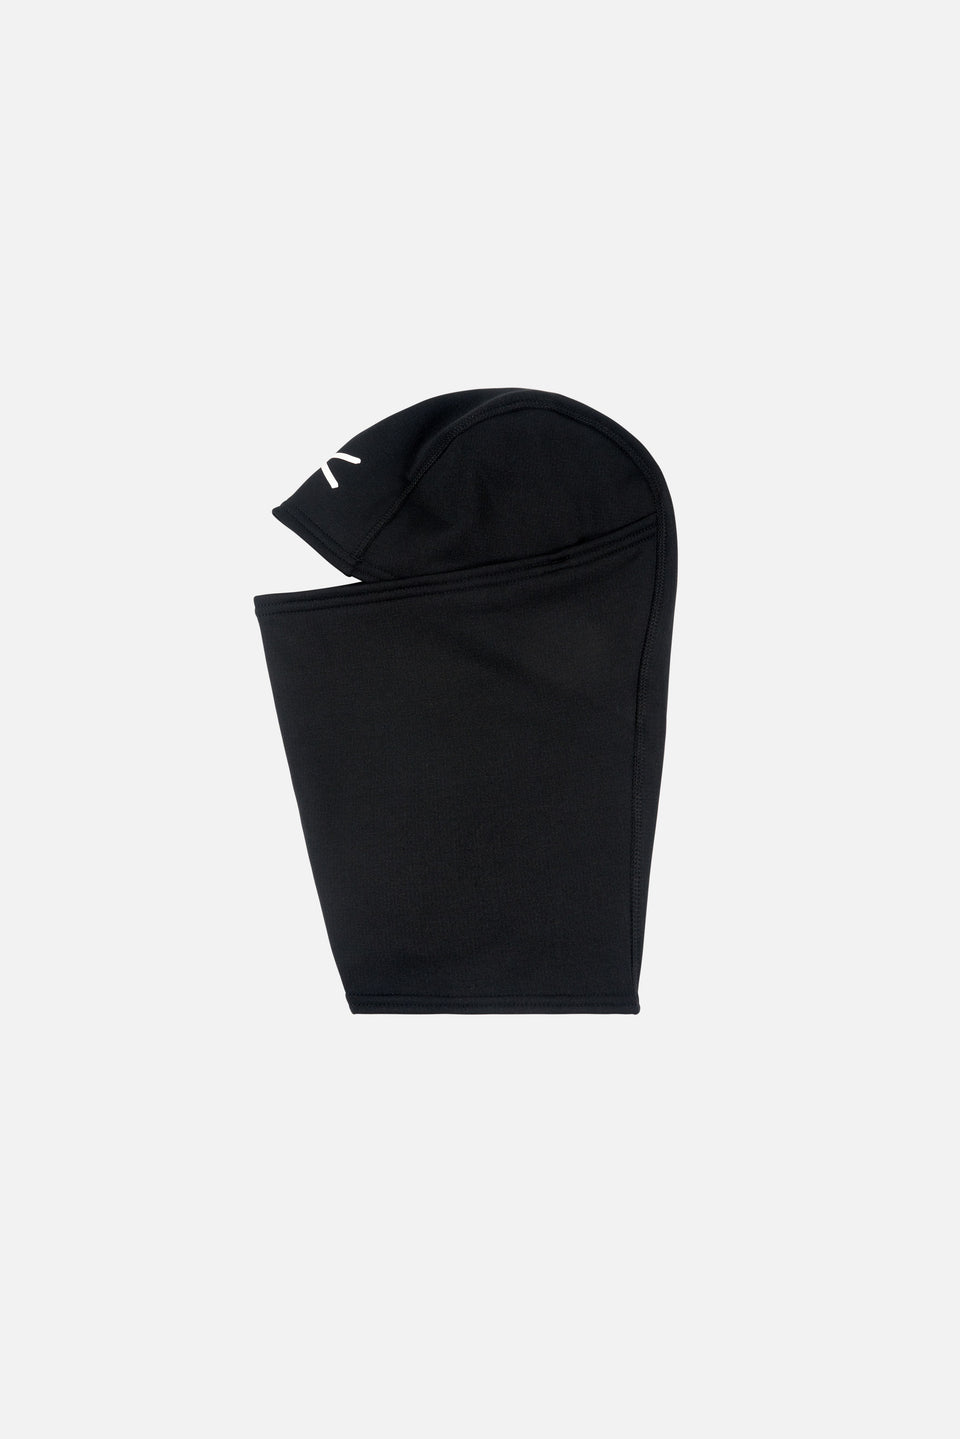 District Vision FW23 Men's Running Collection Articulated Grid Fleece Balaclava Black Calculus Victoria BC Canada